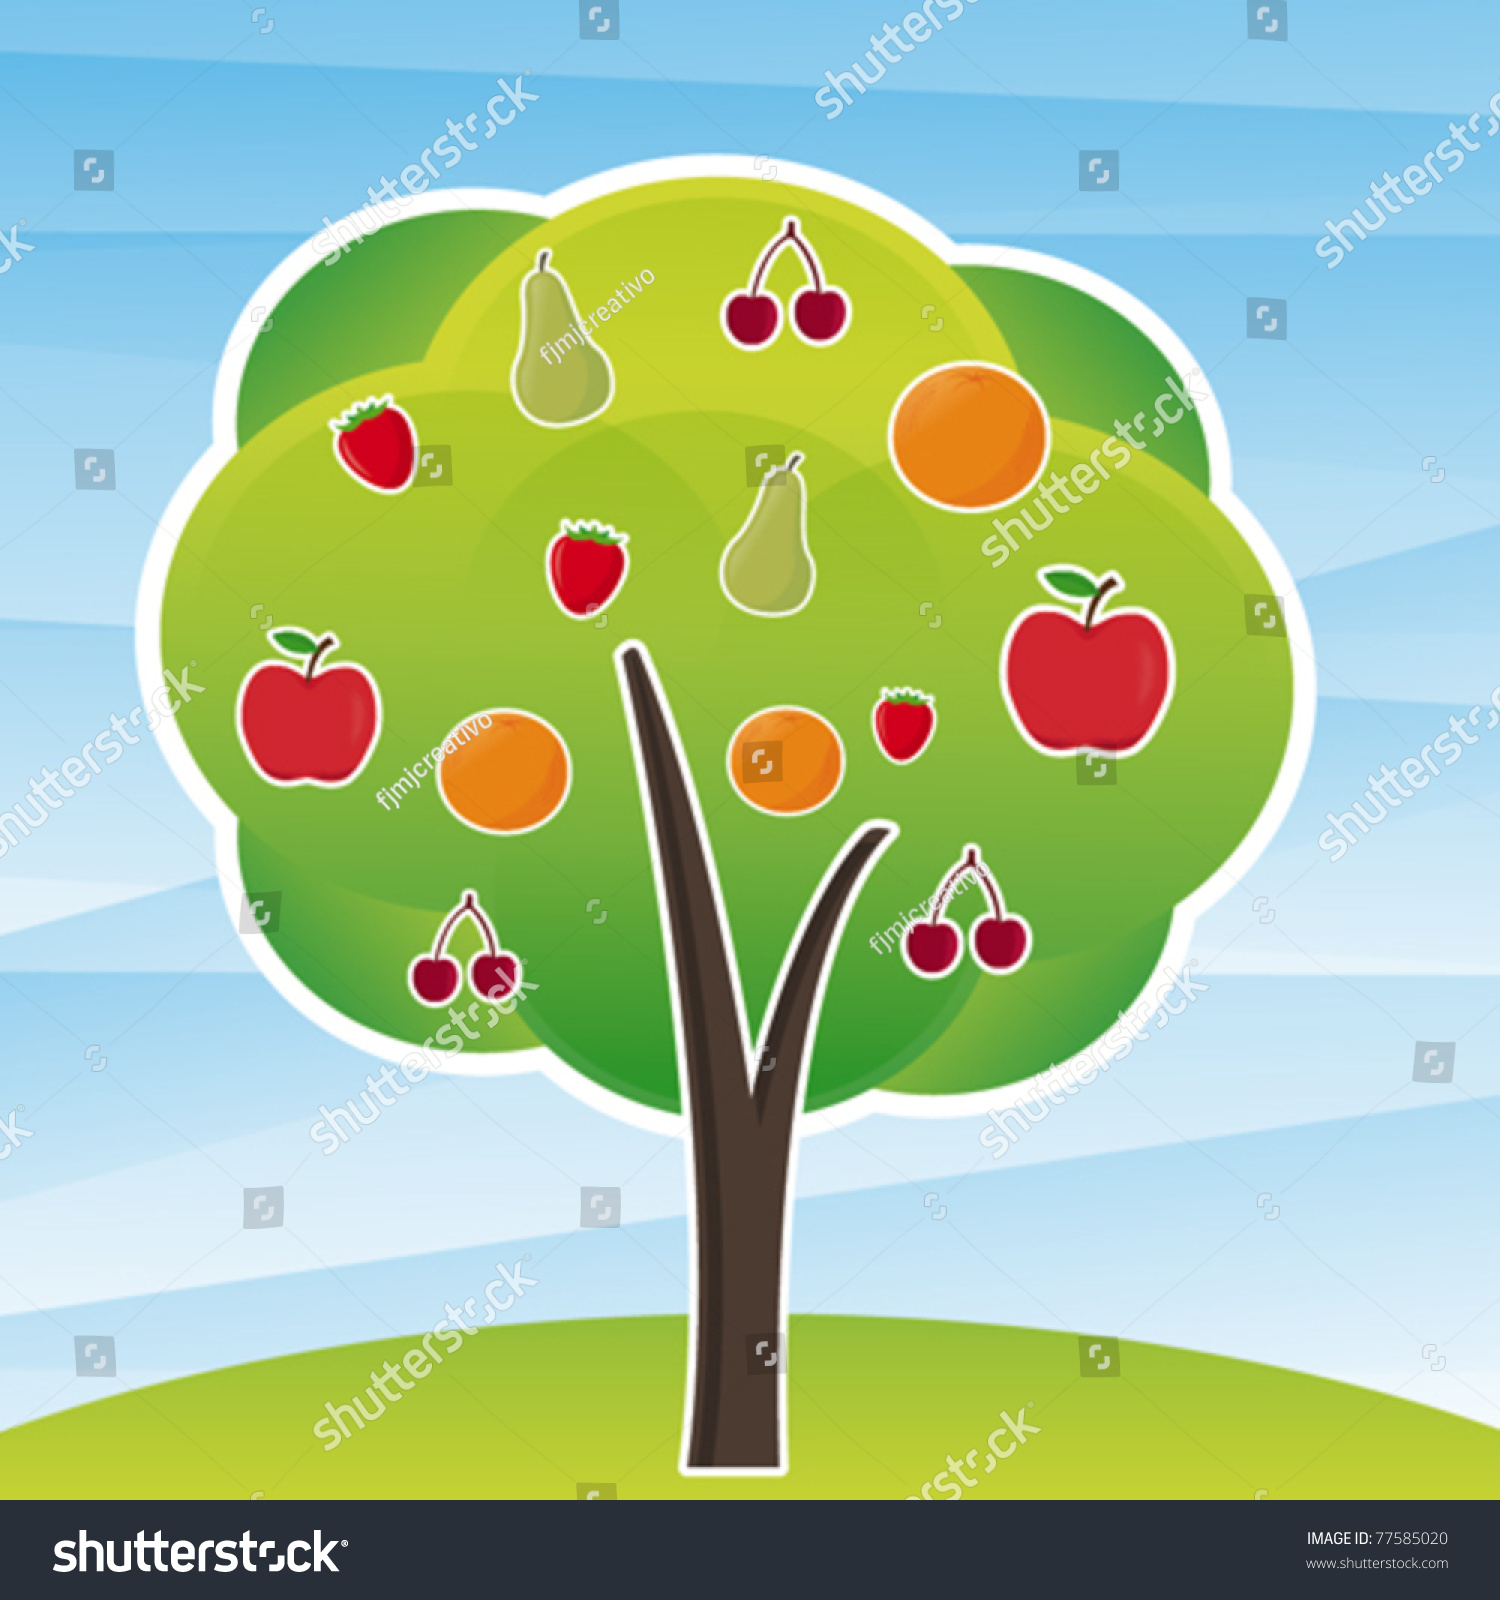 Different Fruits In A Tree Stock Vector Illustration 77585020